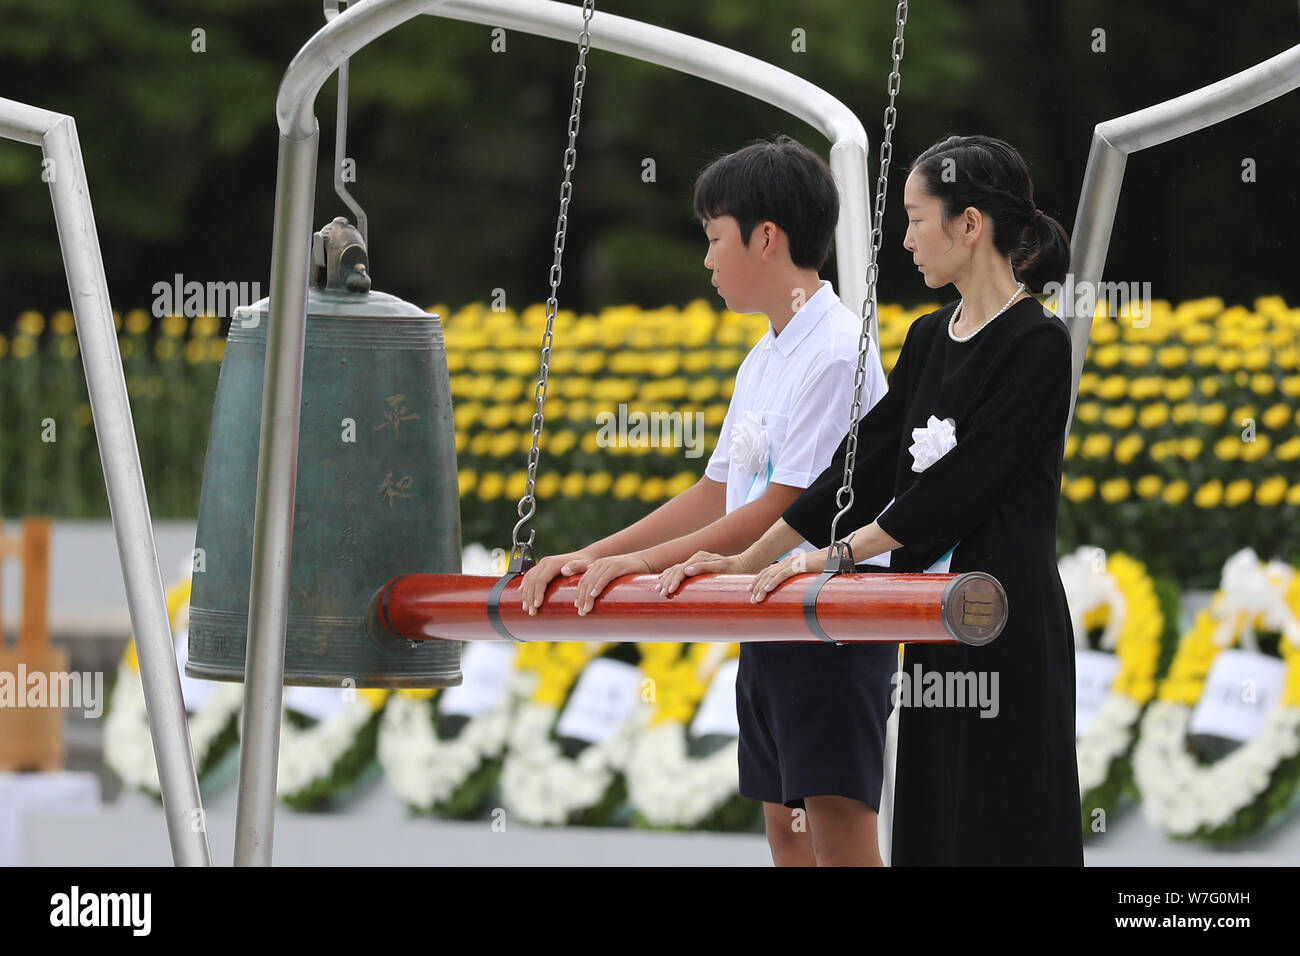 Hiroshima, Japan. 6th Aug, 2019. People attend an annual memorial ceremony in Hiroshima, Japan, Aug. 6, 2019. Hiroshima, a Japanese city hit by a U.S. atomic bomb at the end of World War II, marked the 74th anniversary of the bombing on Tuesday. Credit: Du Xiaoyi/Xinhua/Alamy Live News Stock Photo